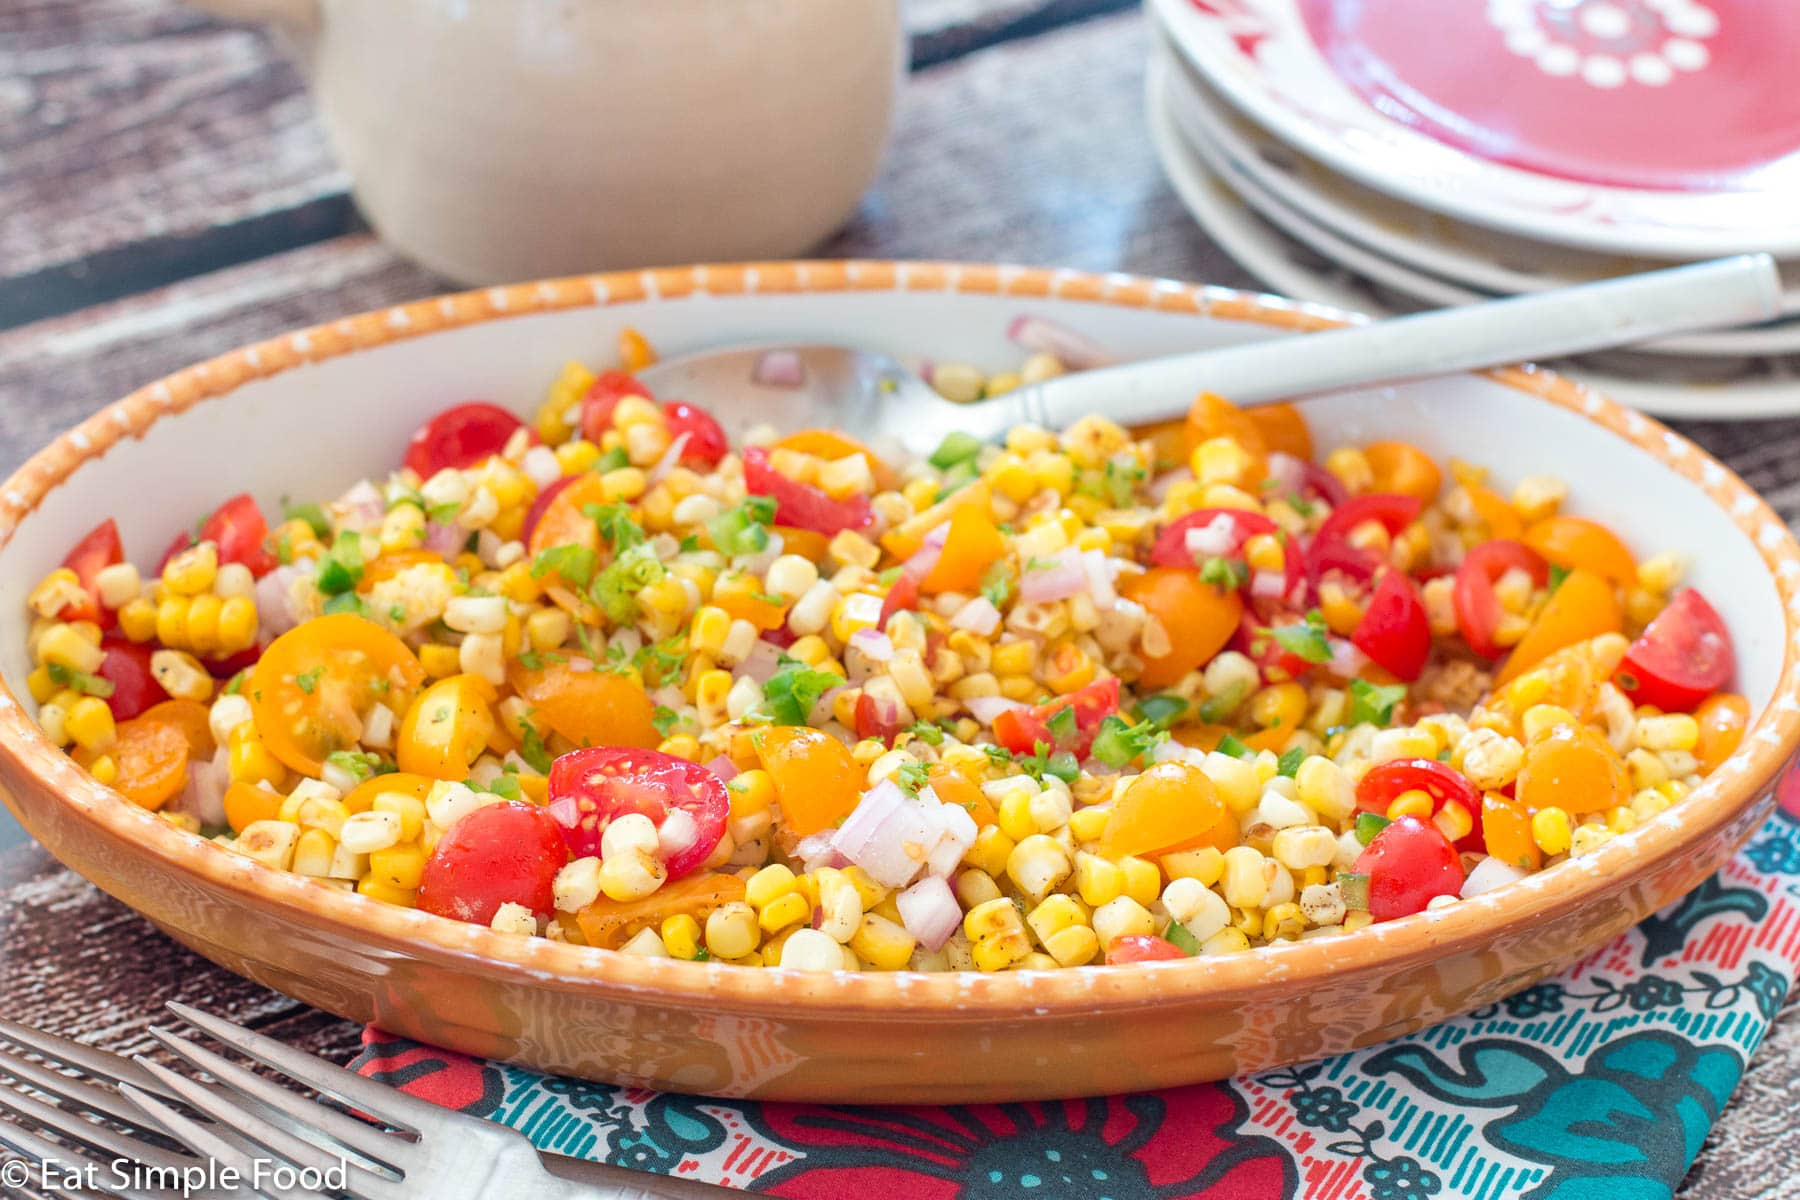 Oval white bowl of corn salad w/ quartered cherry tomatoes, jalapenos, red onions, and cilantro. Side view.